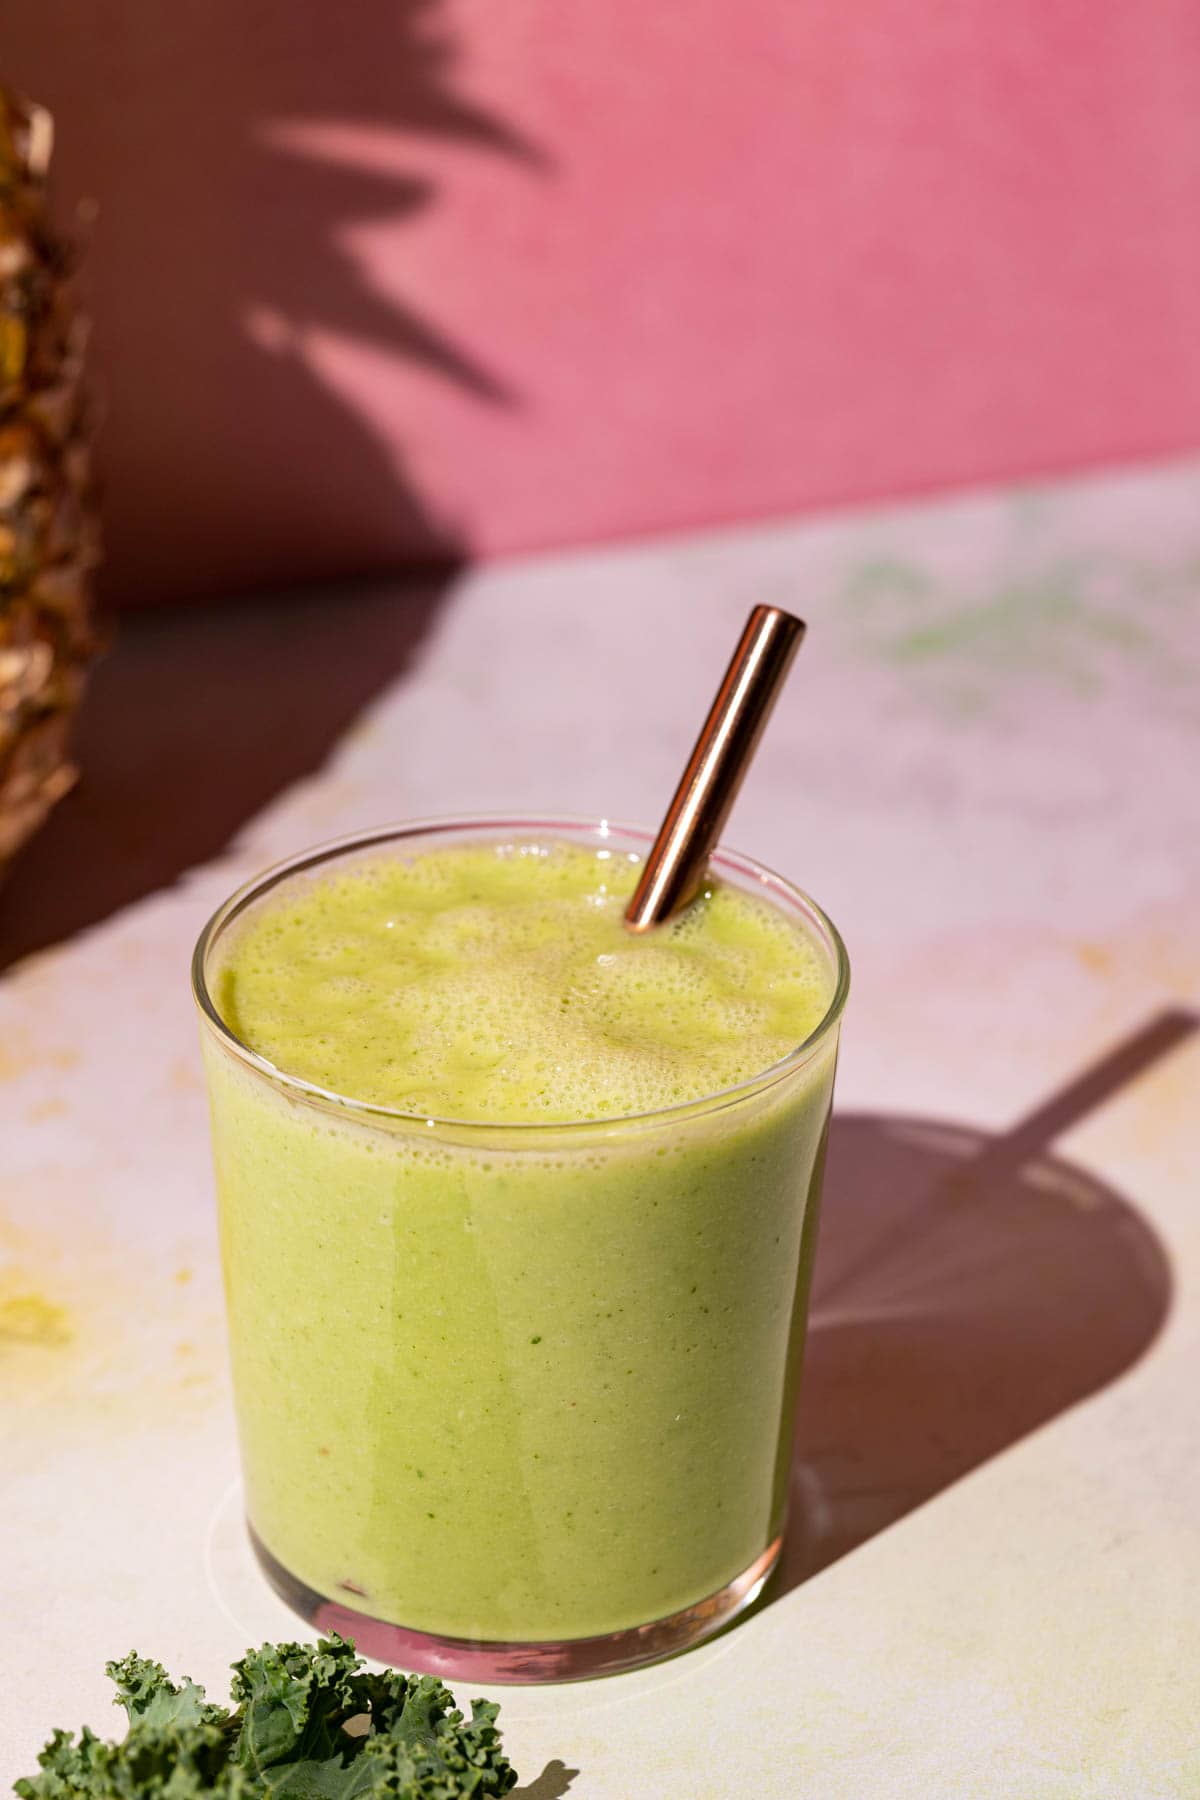 Pineapple Peach smoothie with metallic straw on a colorful background beside kale